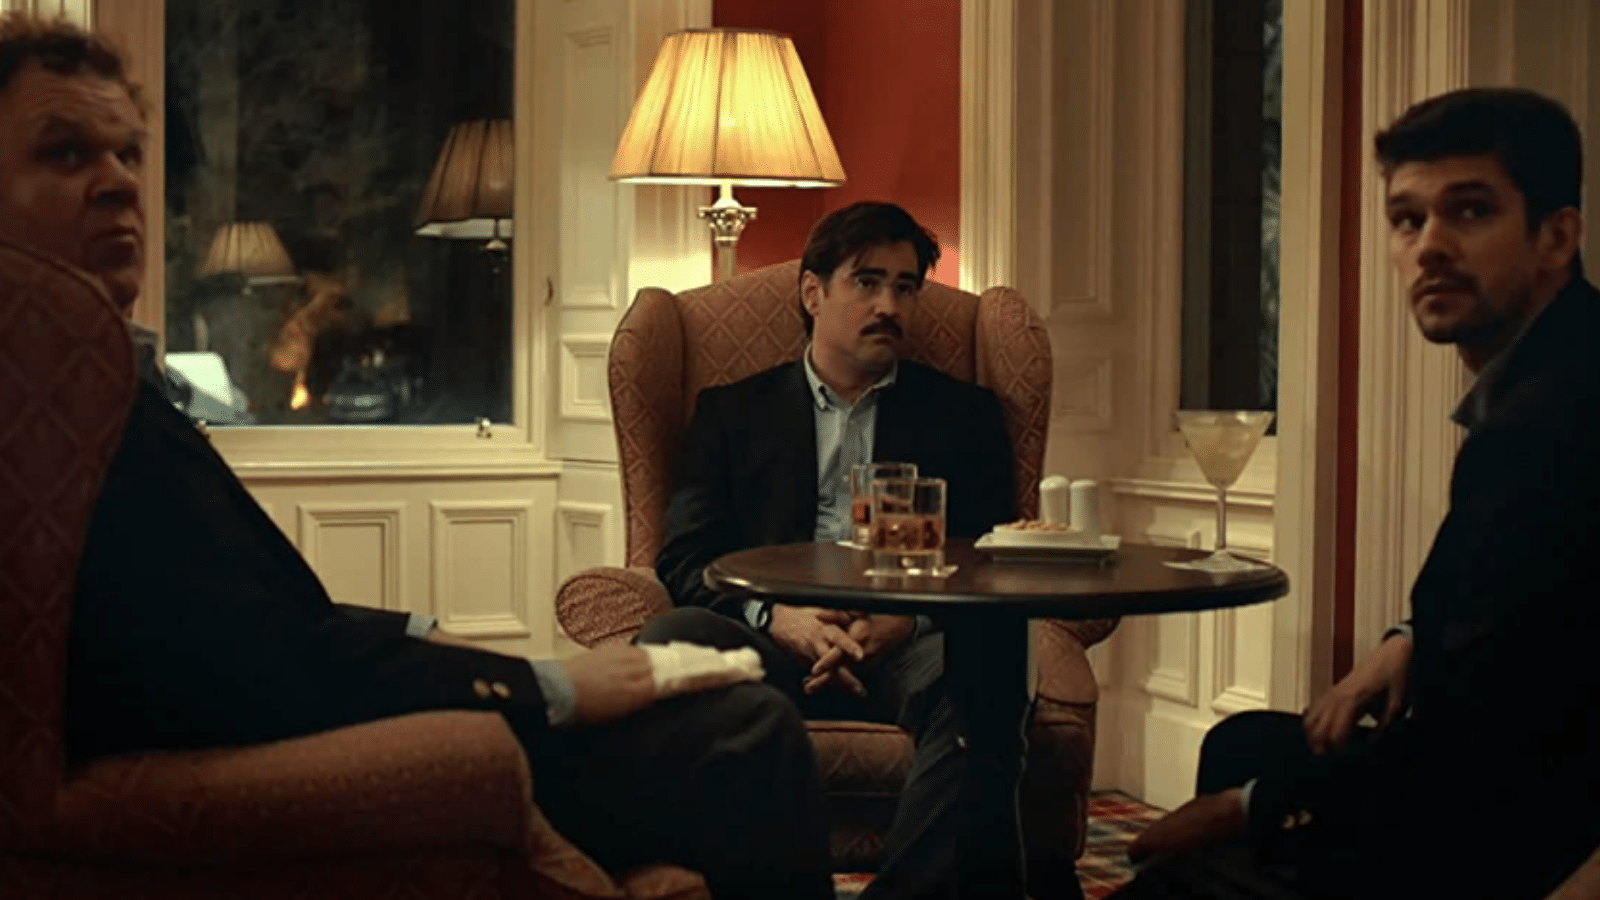 The Lobster John C. Reilly, Colin Farrell, Ben Whishaw